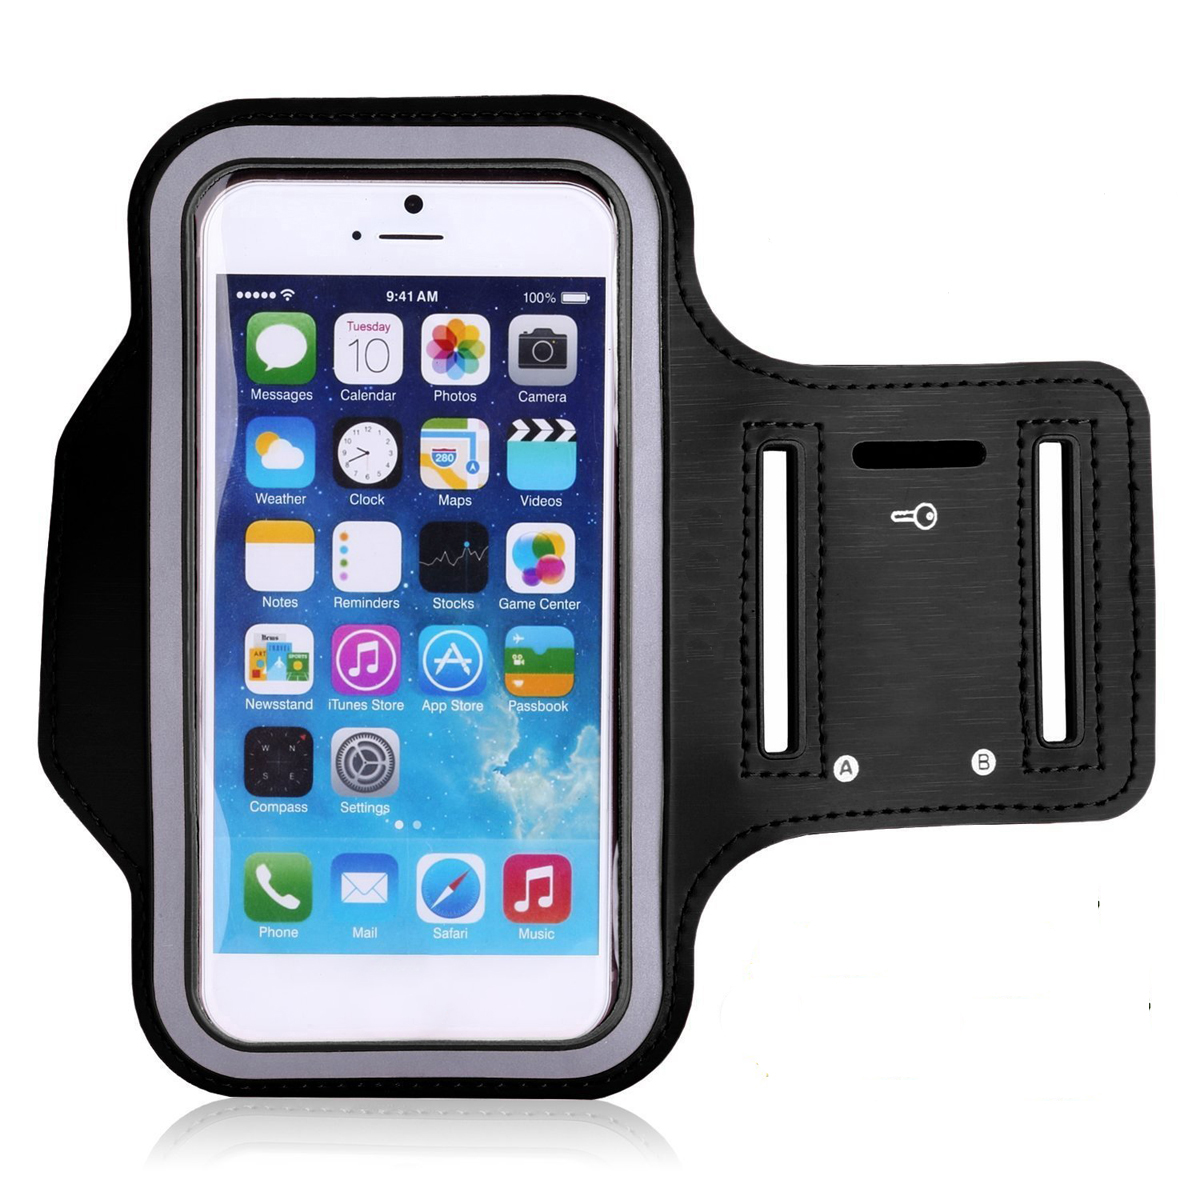 Universal-Sports-Elastic-Armband-Sweatproof-Touch-Screen-Mobile-Phone-Arm-Bags-with-Earphone-Port-fo-1890480-1